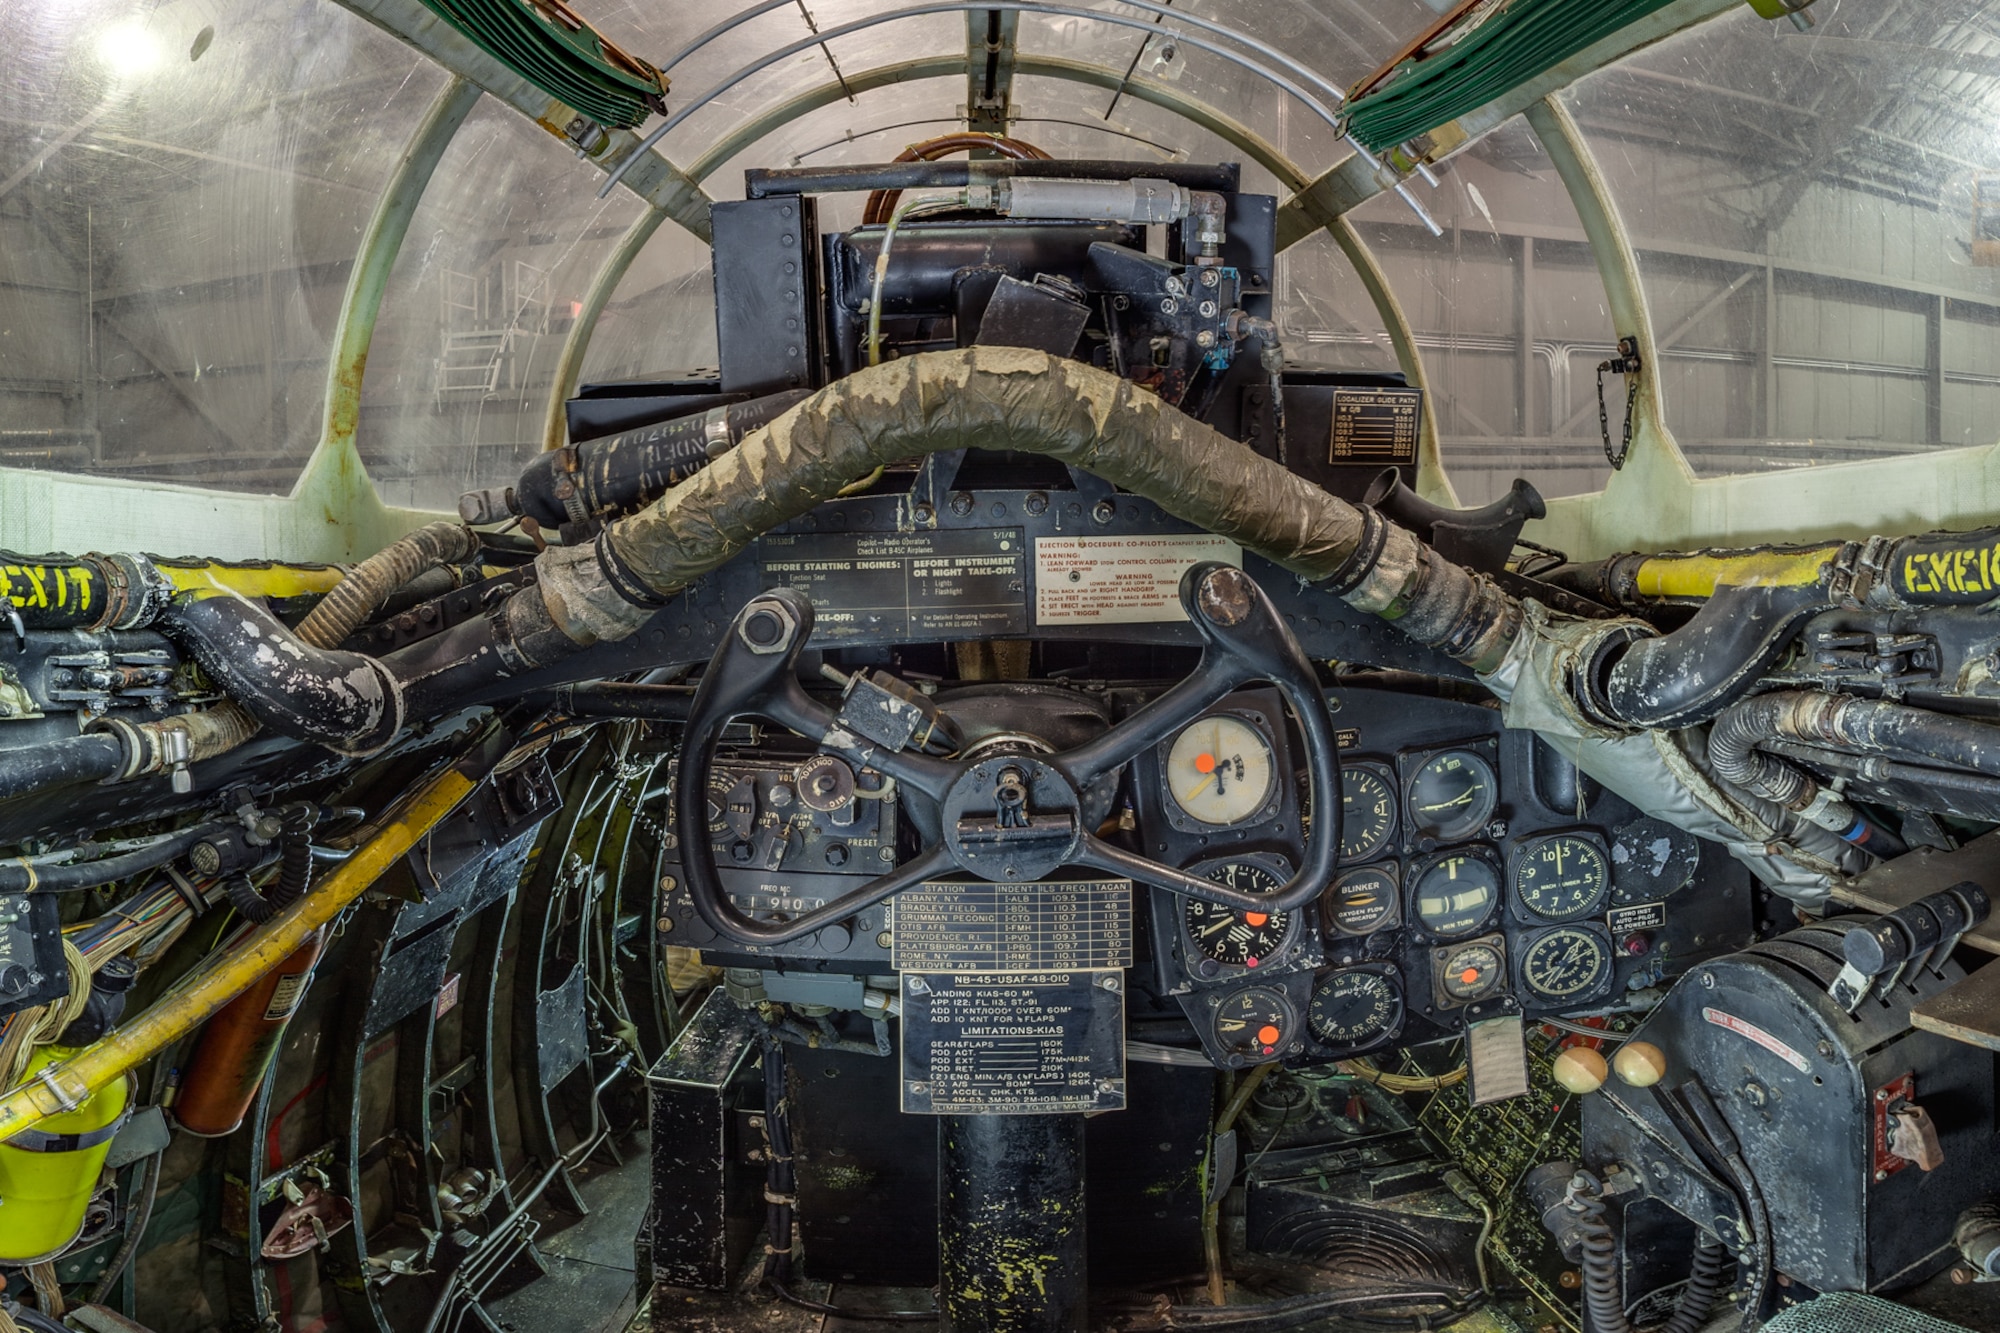 DAYTON, Ohio -- North American B-45C Tornado co-pilot cockpit view in the Korean War Gallery at the National Museum of the United States Air Force.(Photo courtesy of Lyle Jansma, Aerocapture Images)  